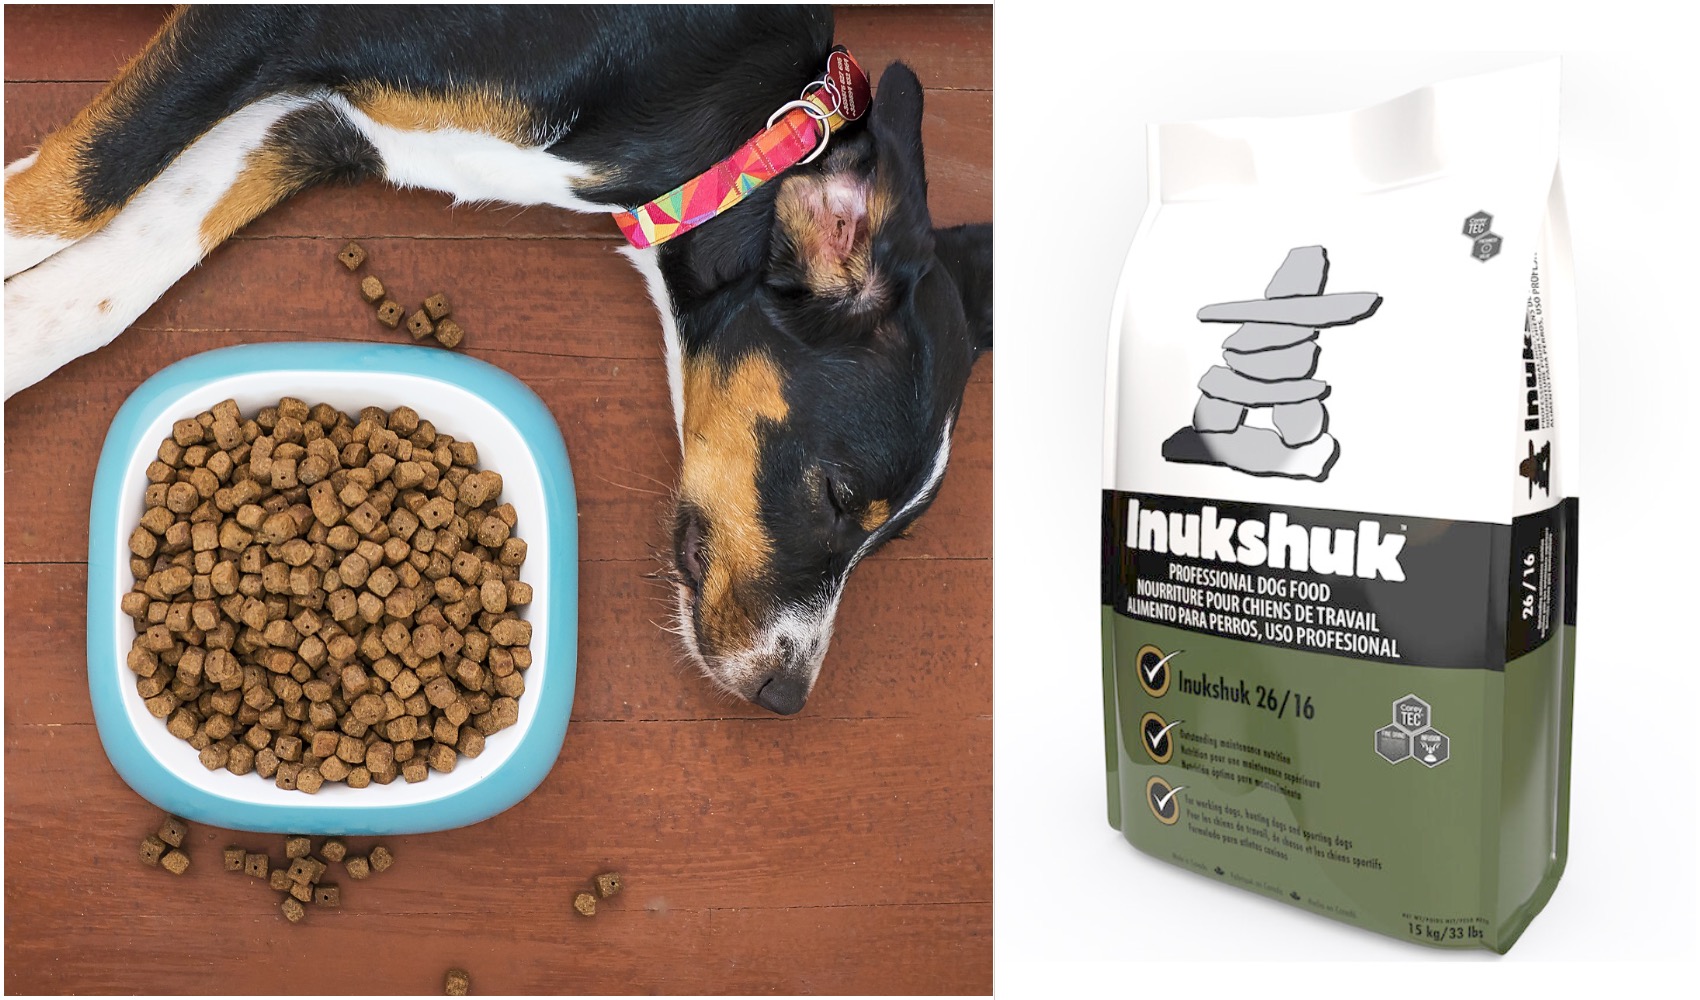 Inukshuk Dog Food: What To Know